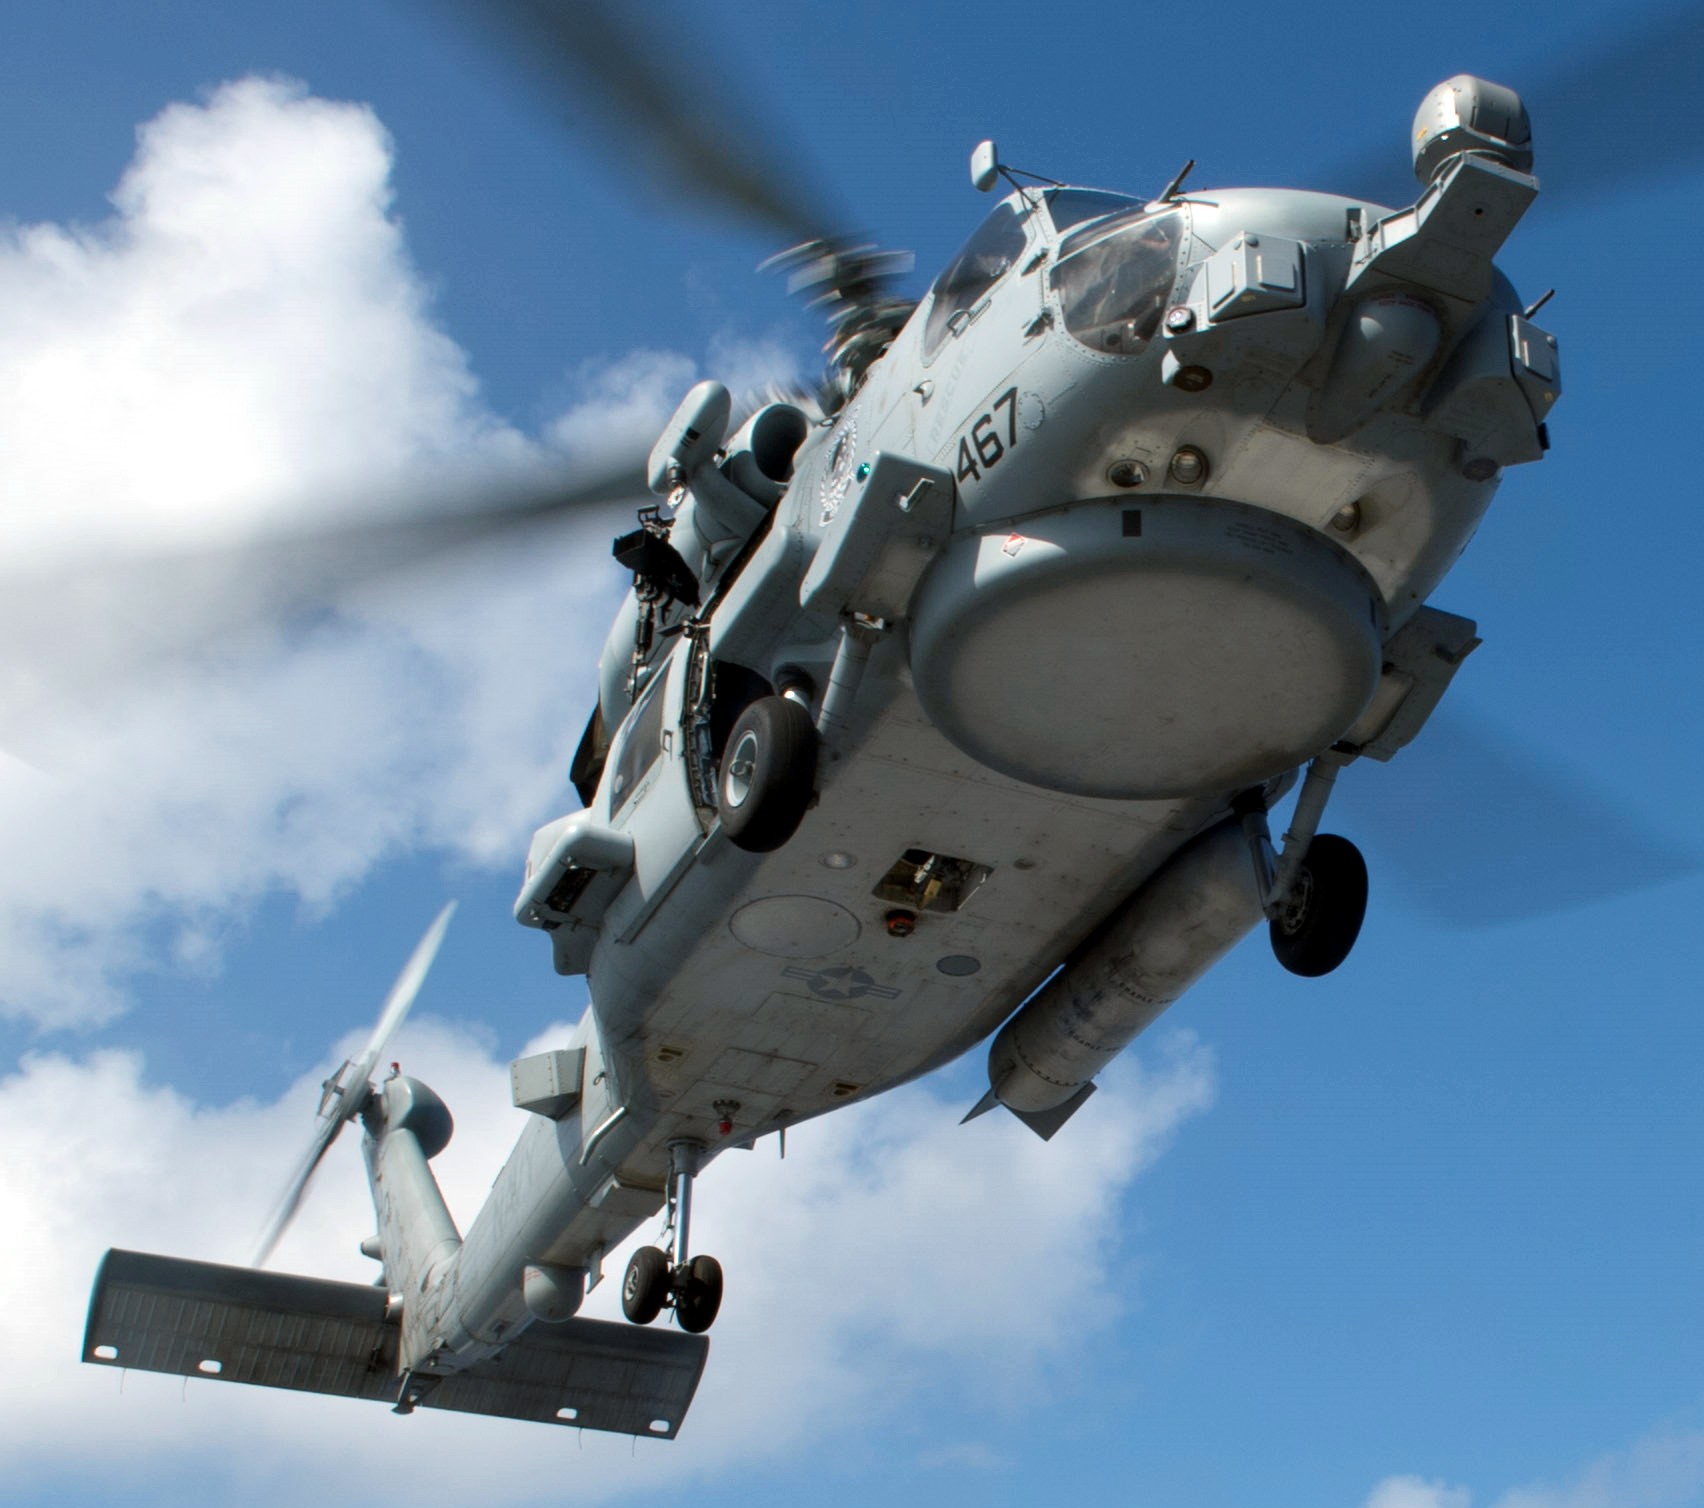 hsm-46 grandmasters helicopter maritime strike squadron mh-60r seahawk 2015 25